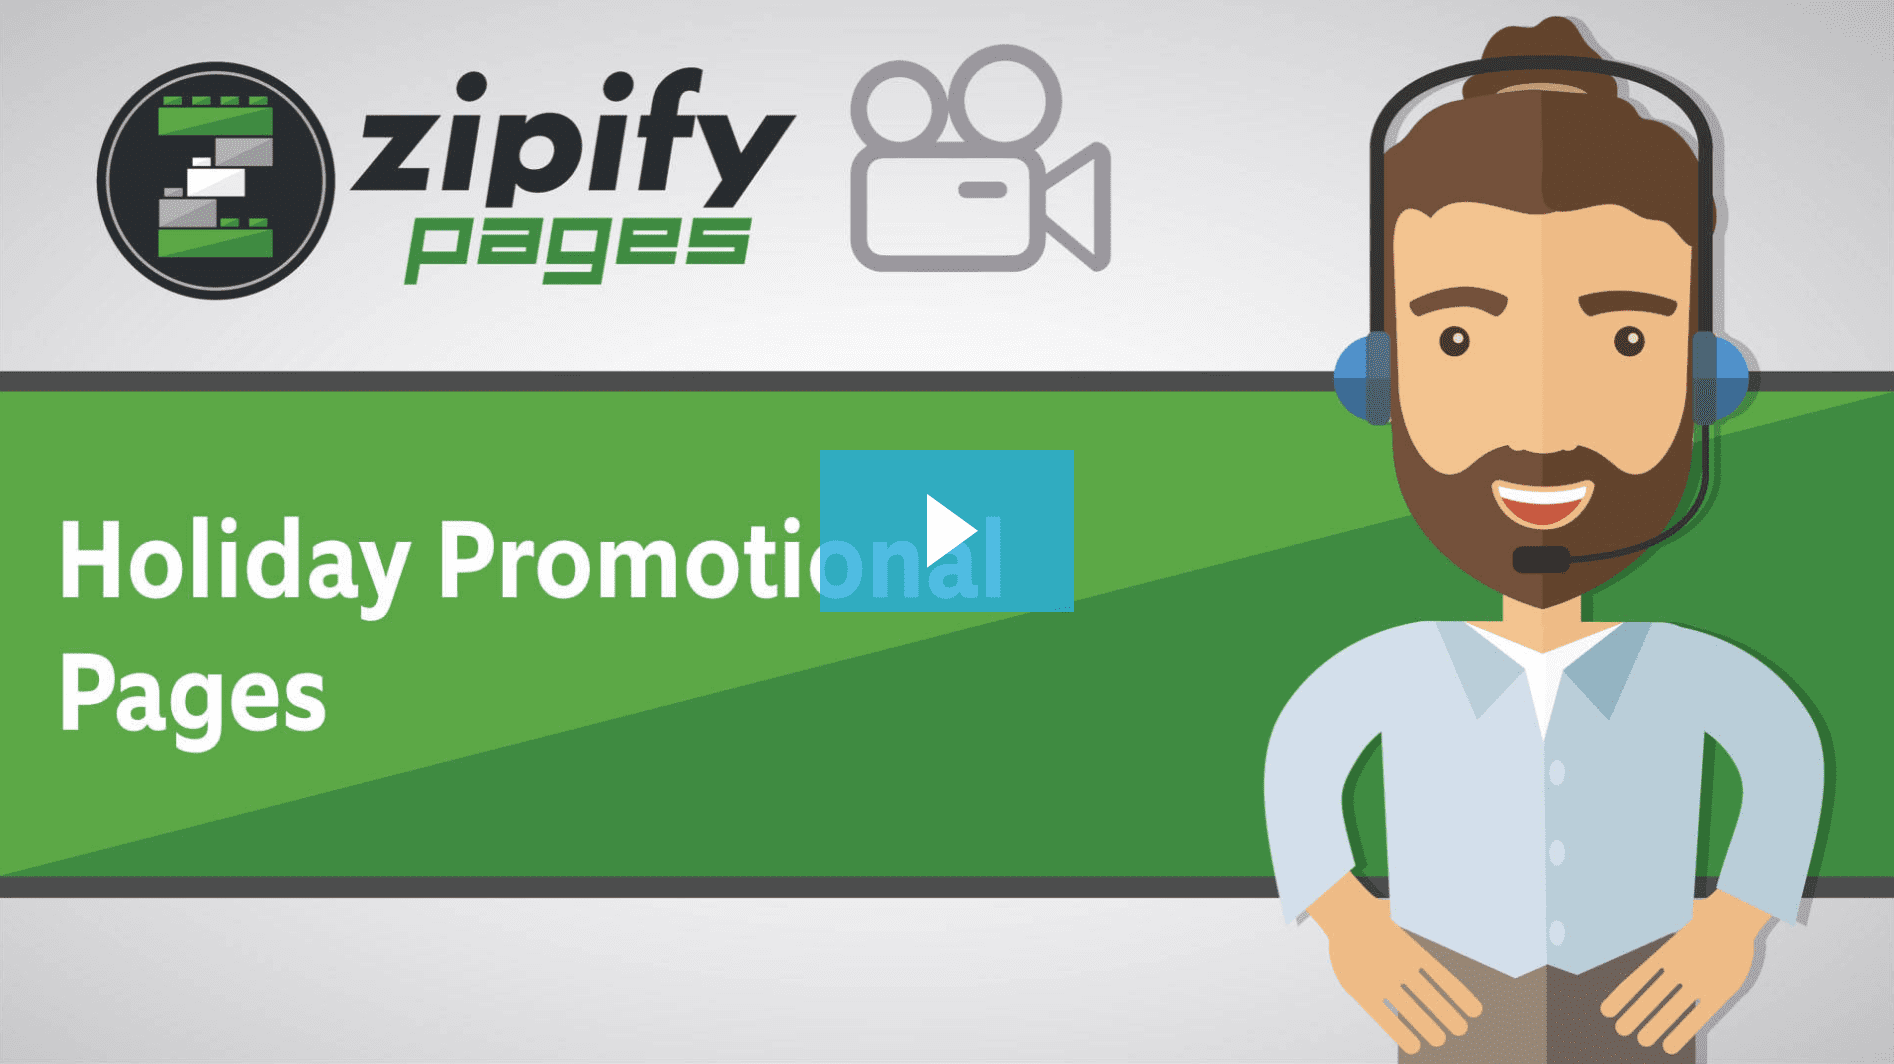 Zipify pages - Holiday Promotional Pages